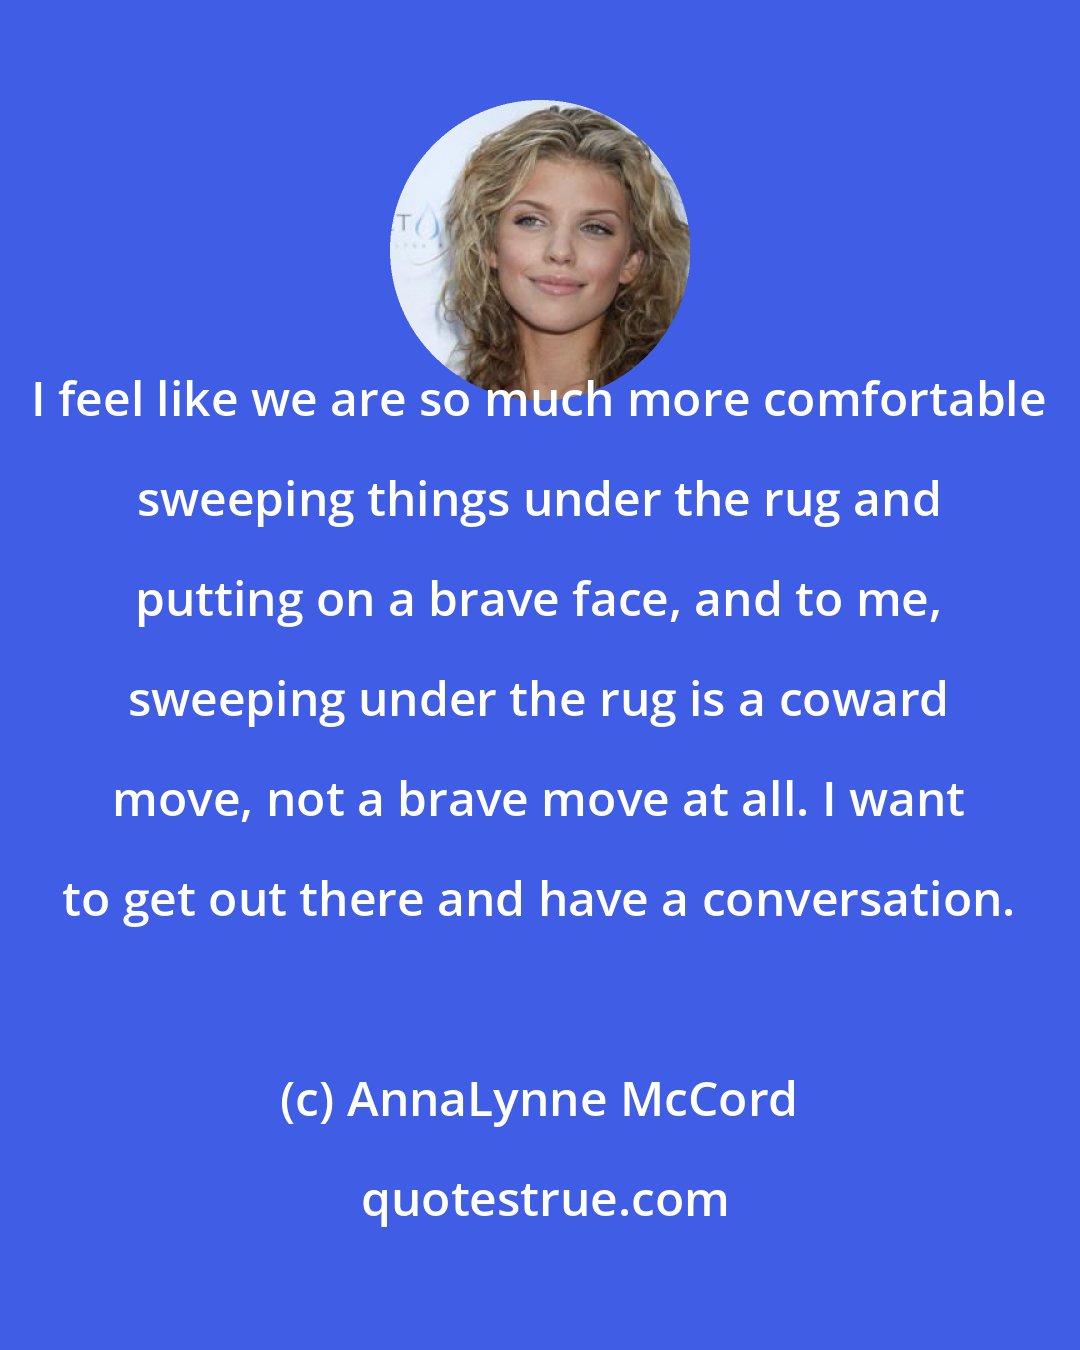 AnnaLynne McCord: I feel like we are so much more comfortable sweeping things under the rug and putting on a brave face, and to me, sweeping under the rug is a coward move, not a brave move at all. I want to get out there and have a conversation.